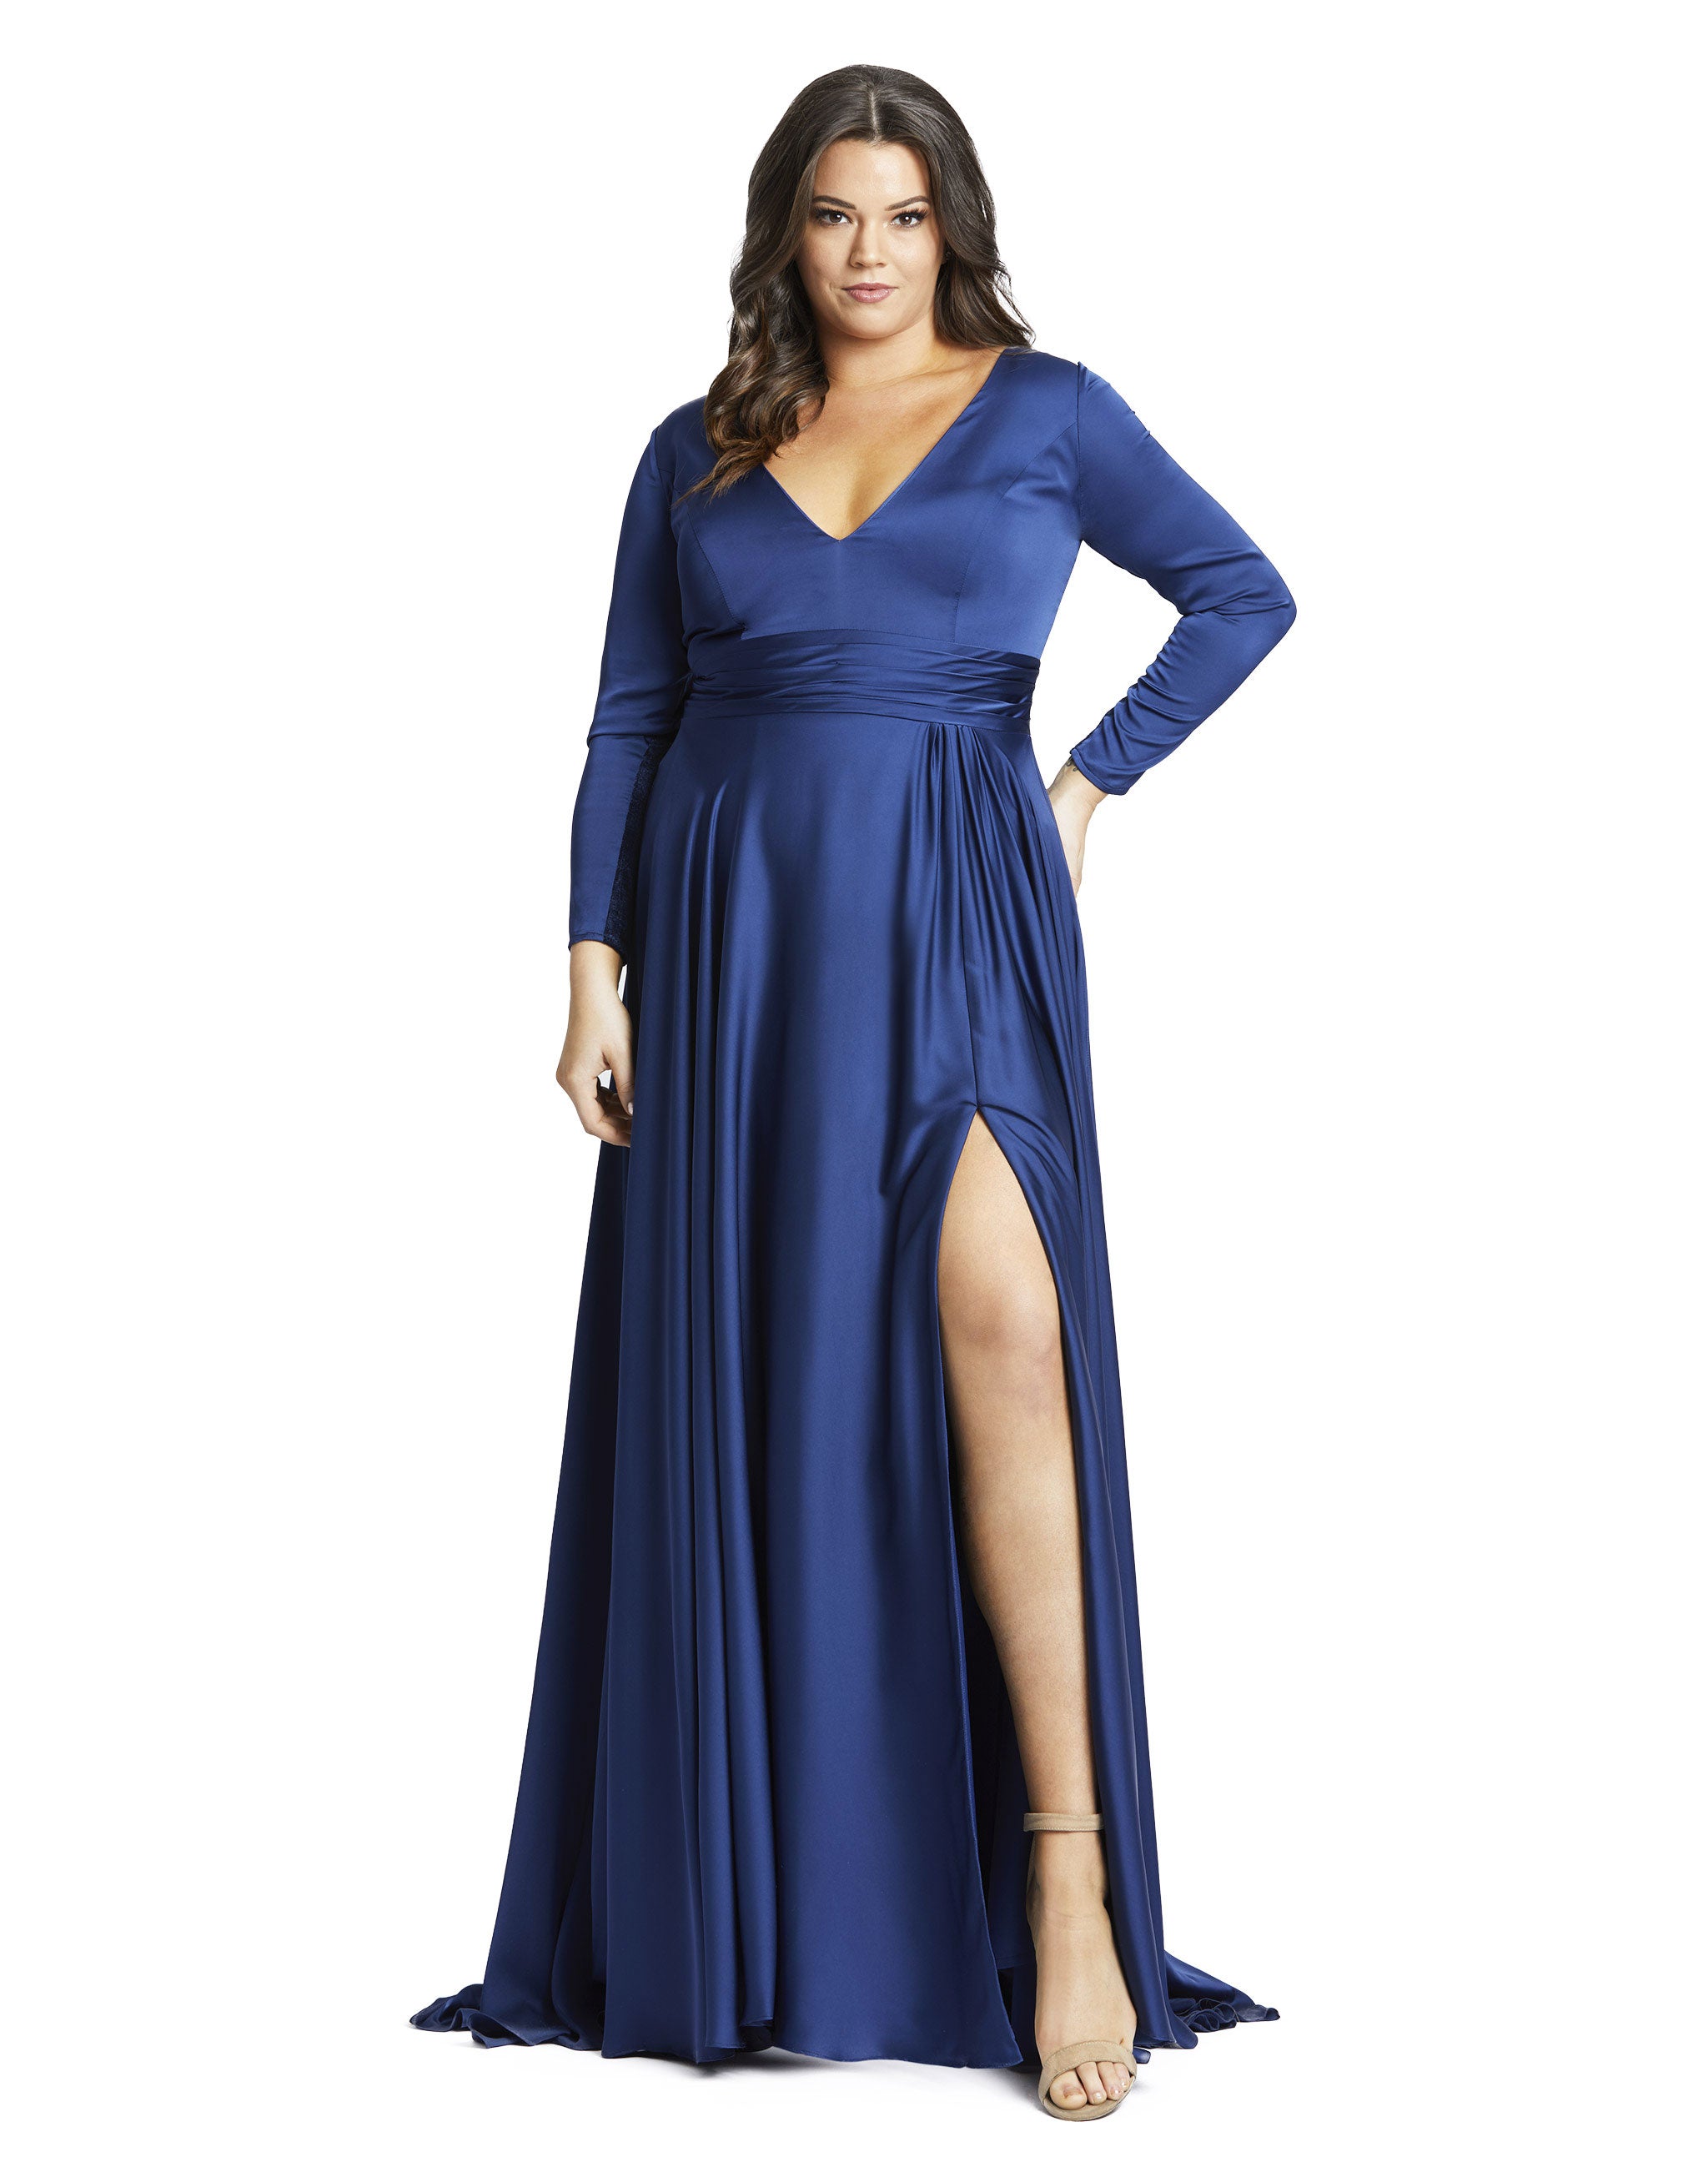 Classic Satin Long Sleeve Evening Gown (Plus) - FINAL SALE